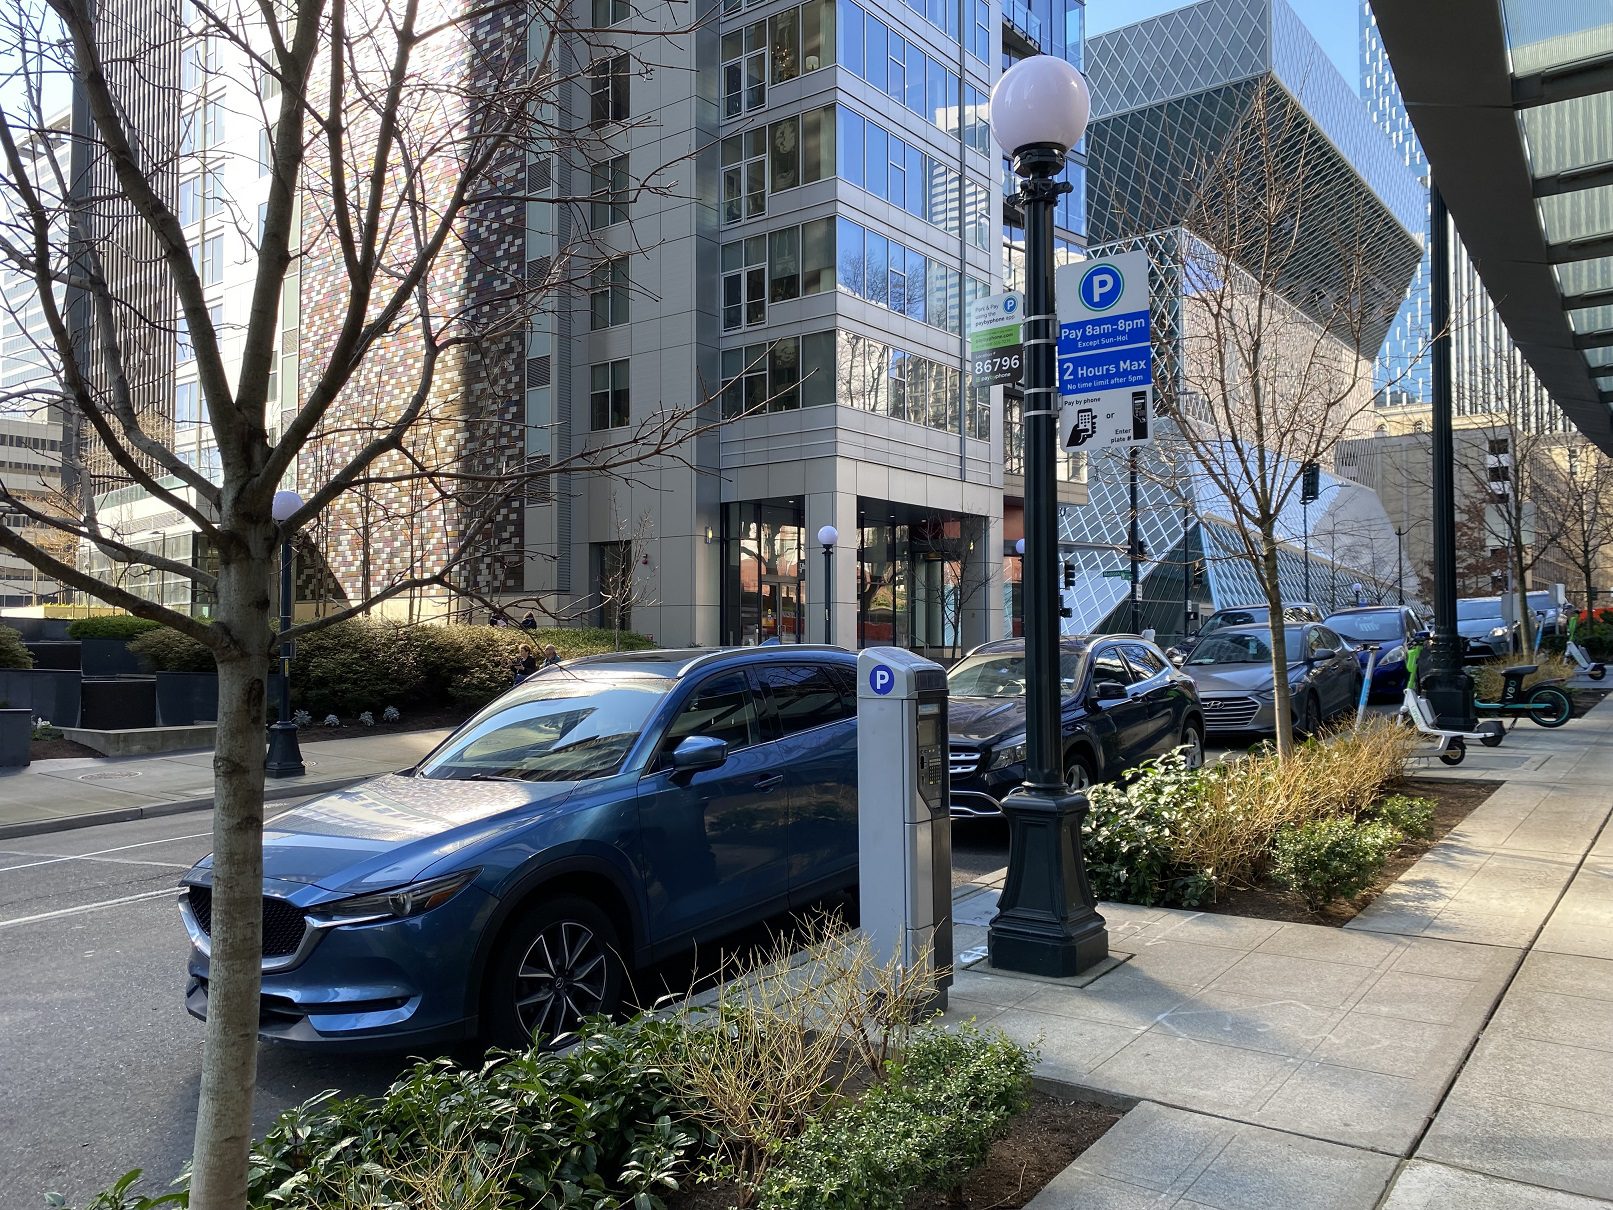 Parked cars line the street in downtown Seattle. Plants, street lights, trees, and large buildings, as well as scooters and bikes, are in the background.